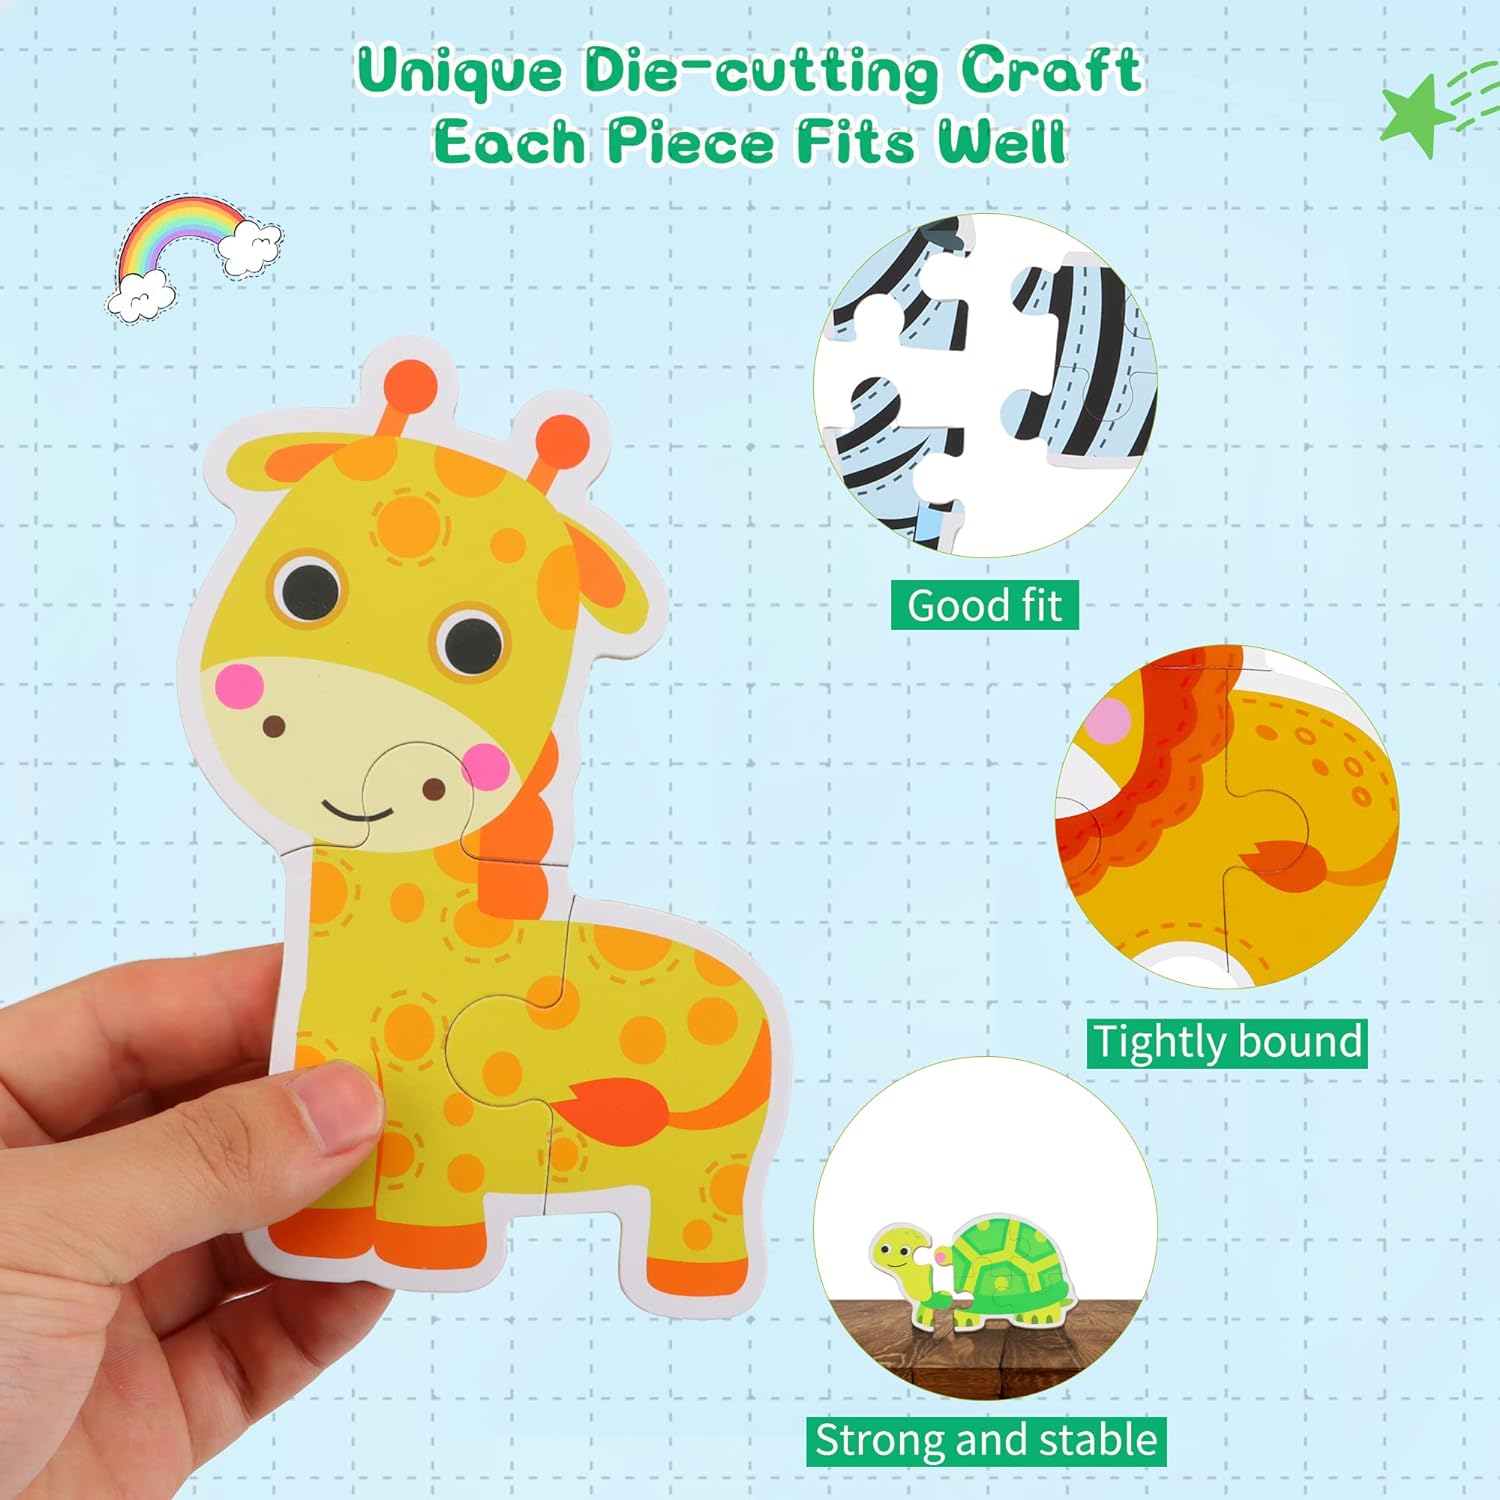 thinkstar 6 Packs Safari Animals Shaped Wooden Jigsaw Puzzles For Toddlers Ages 1-3, Level-Up Puzzles For Beginner, Montessori Learni…